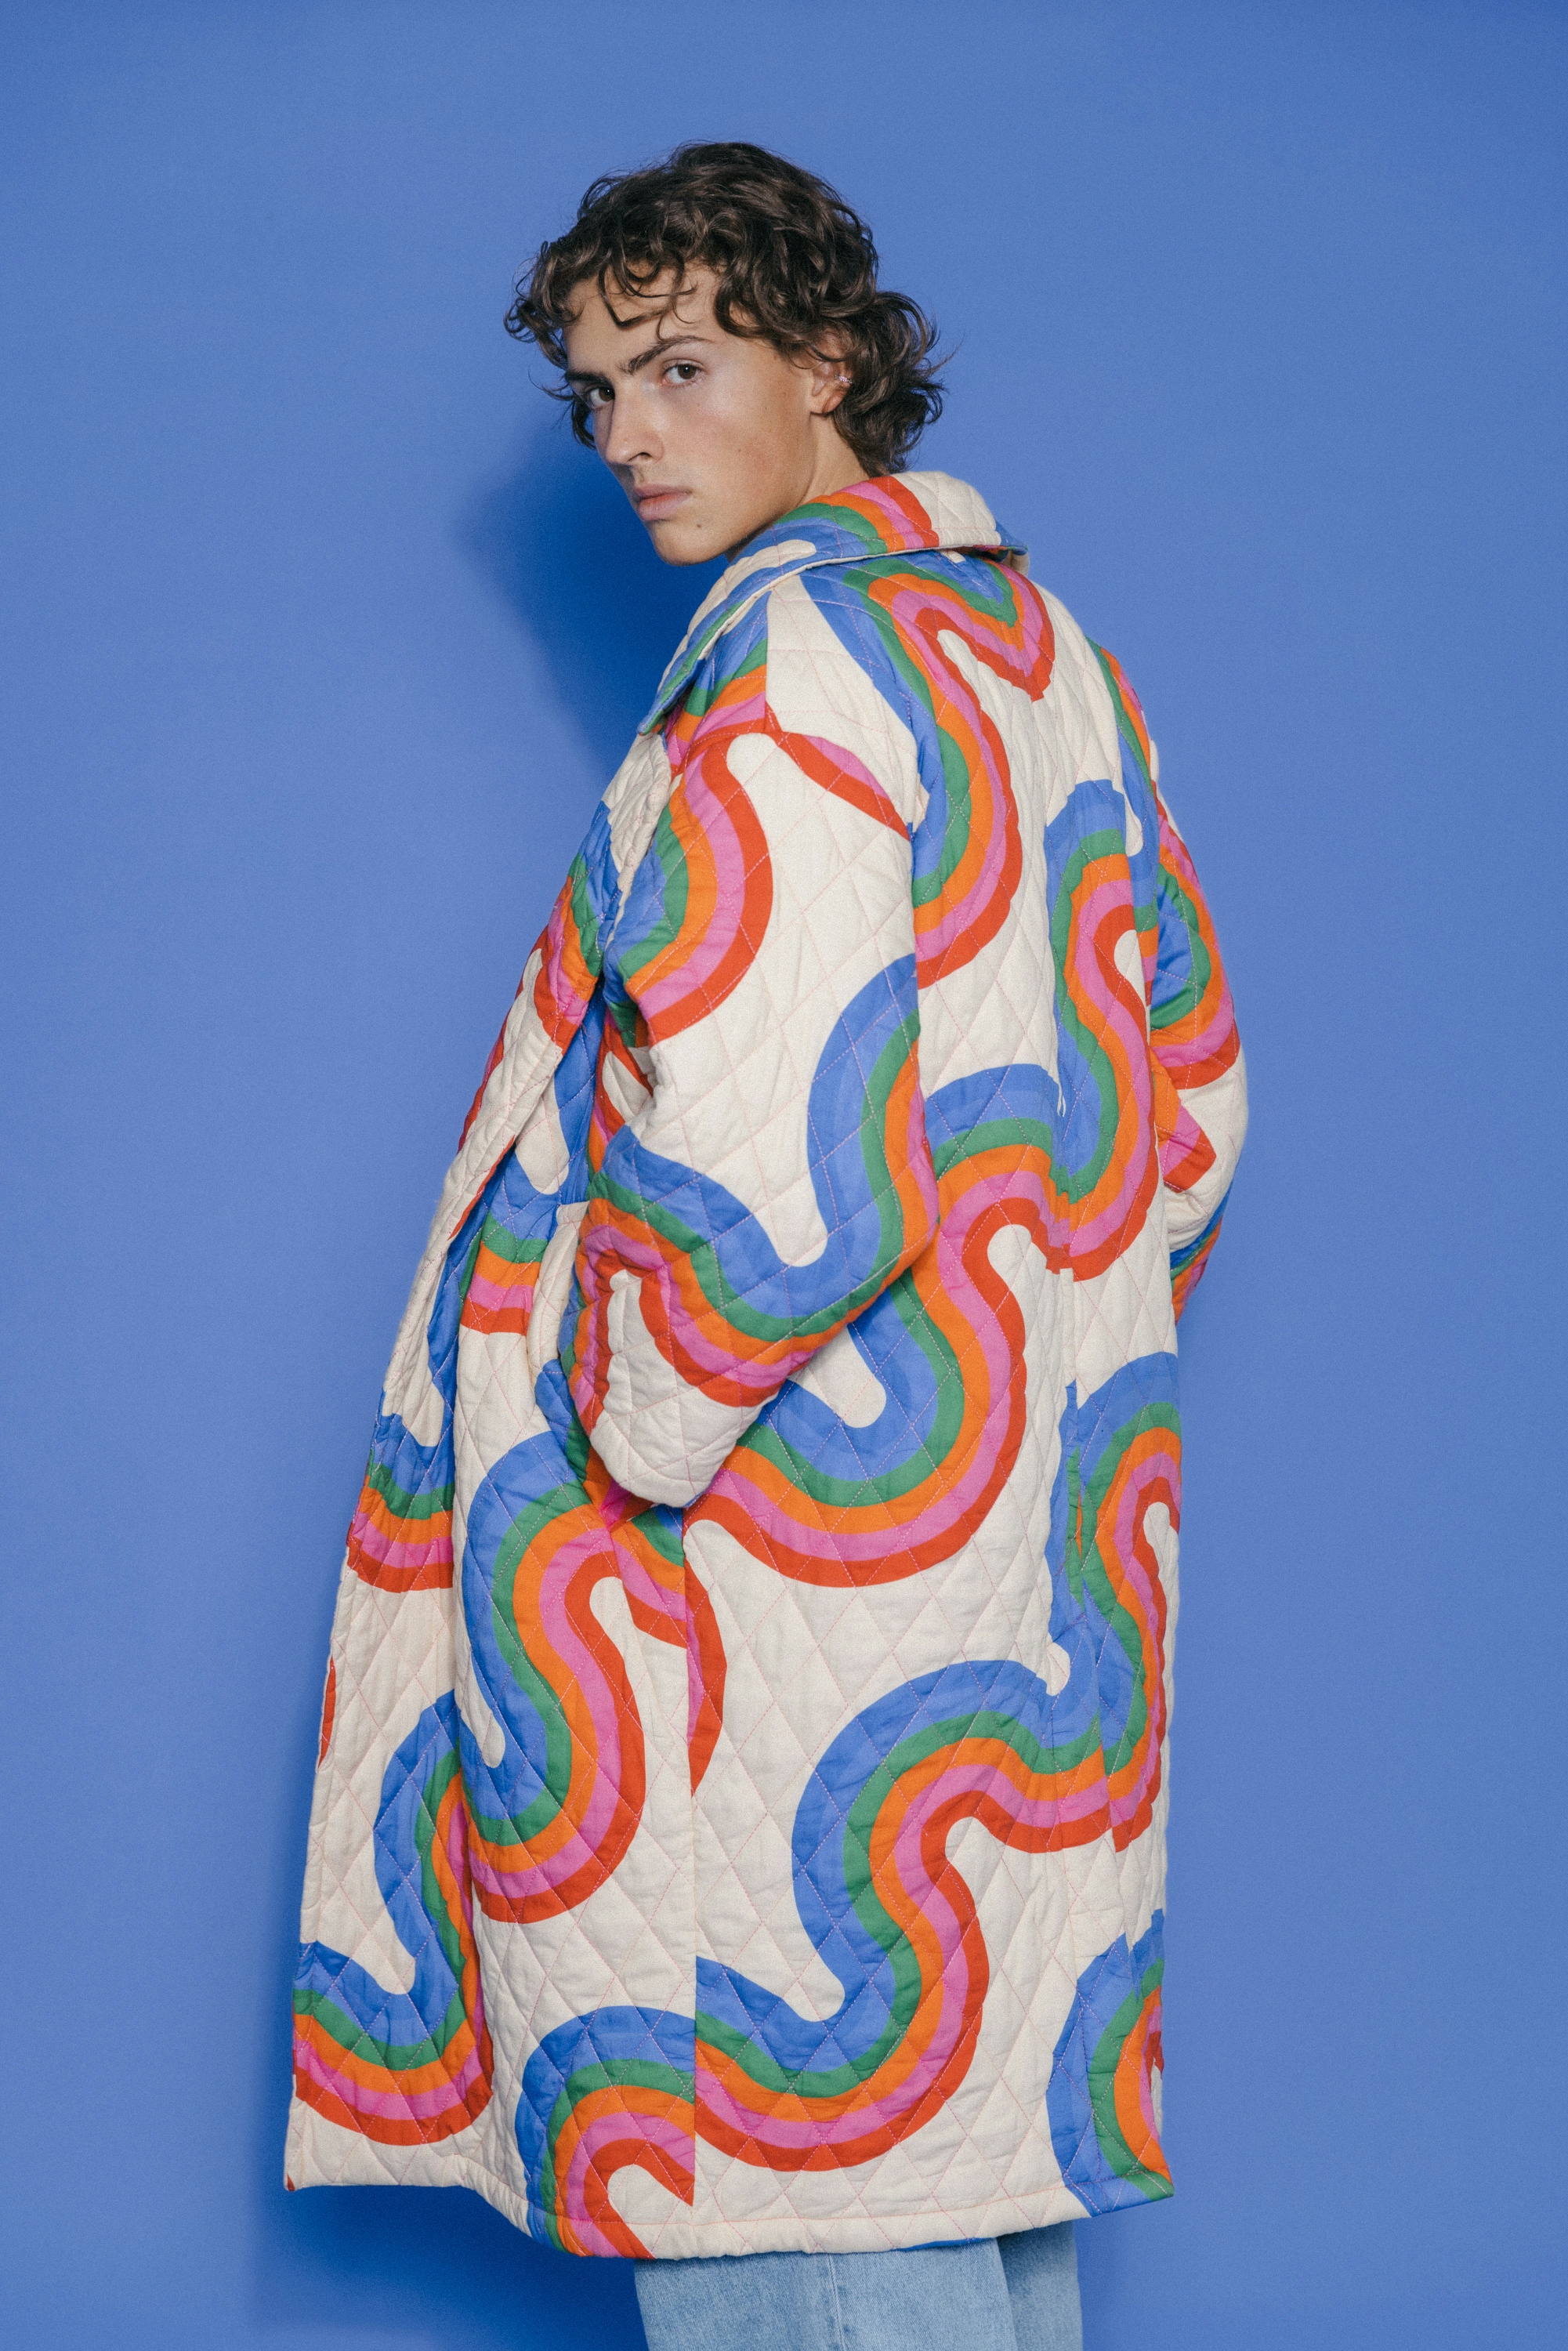 Man wearing a blue jacket with colorful swirls